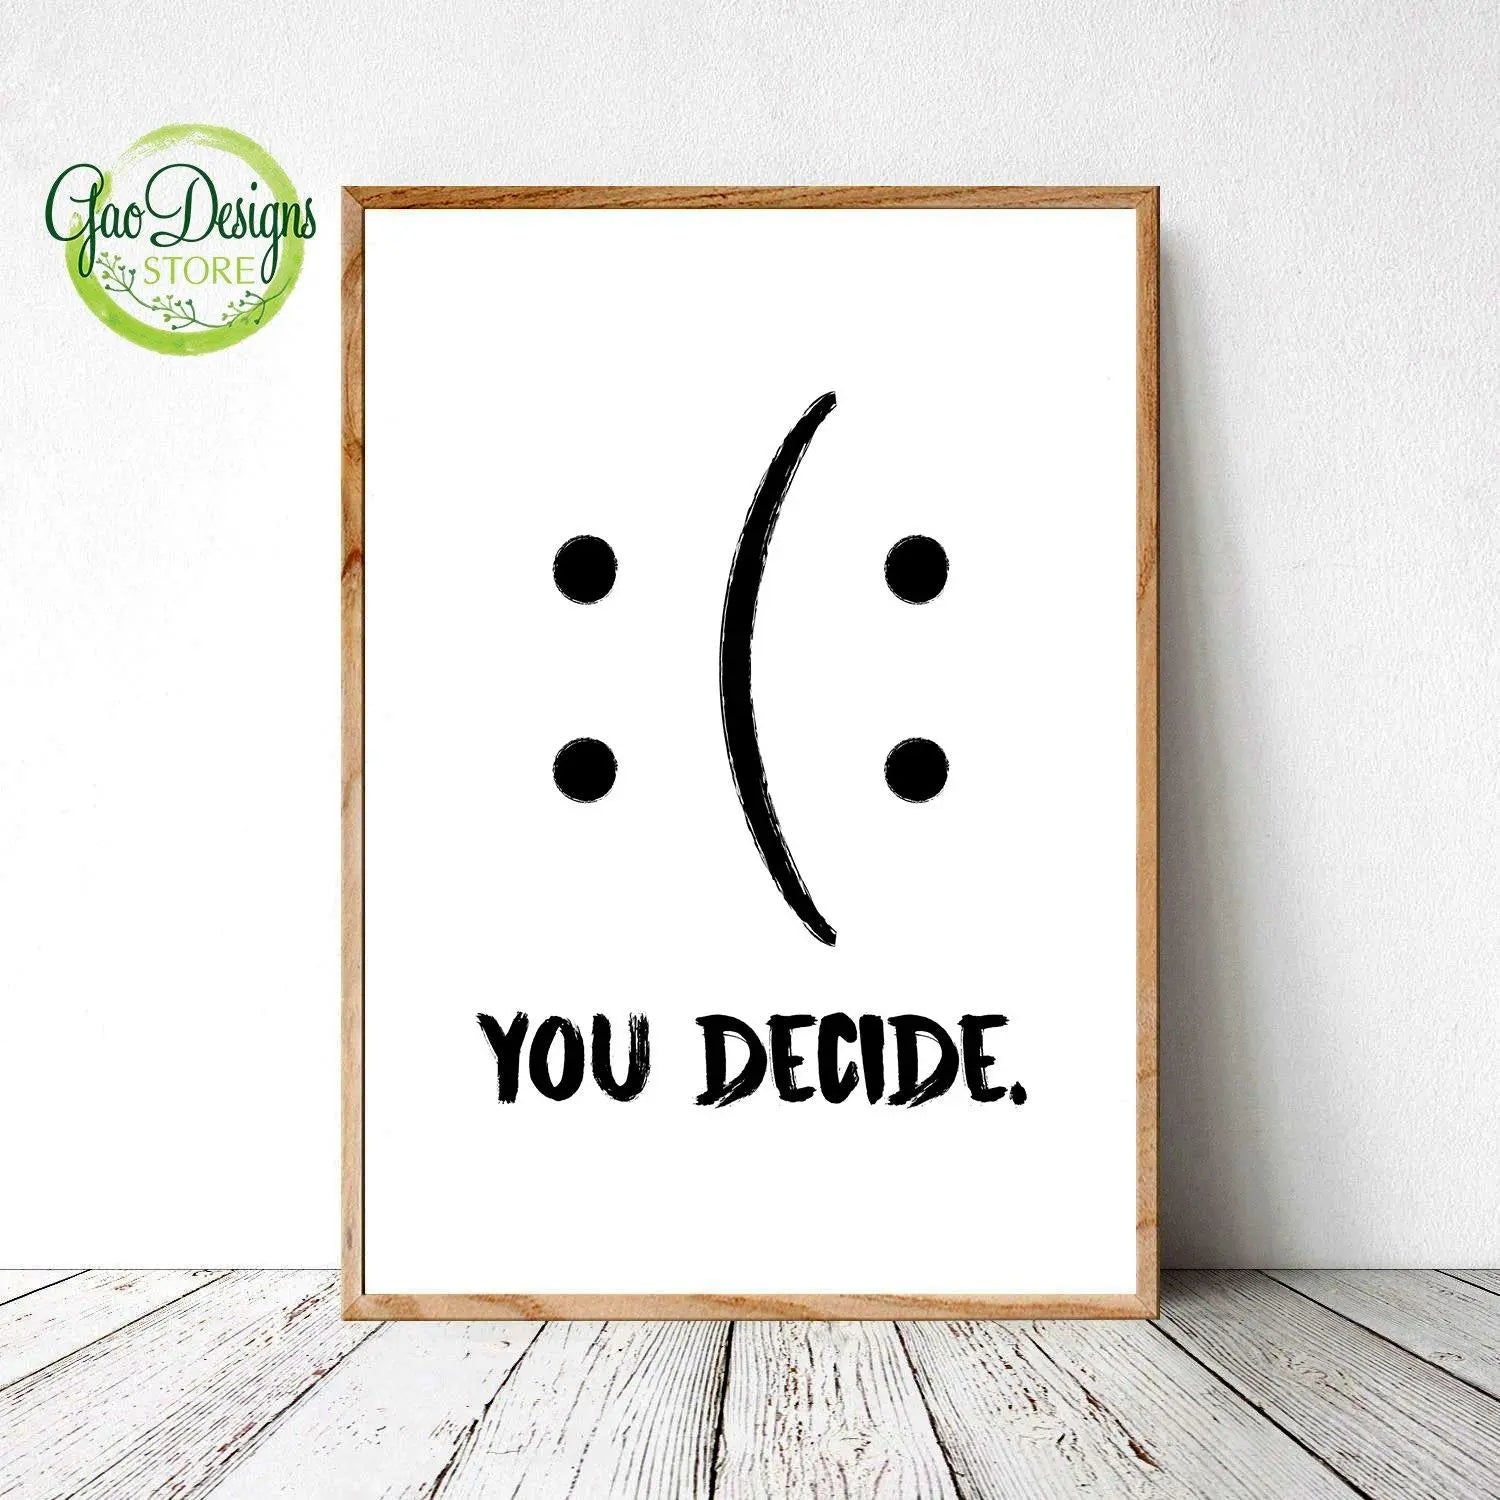 Funny Wall Art, You Decide Print, Funny Quote Poster, Motivational Quote,  Funny Wall Printable, Motivational Art, Funny Quote Prints